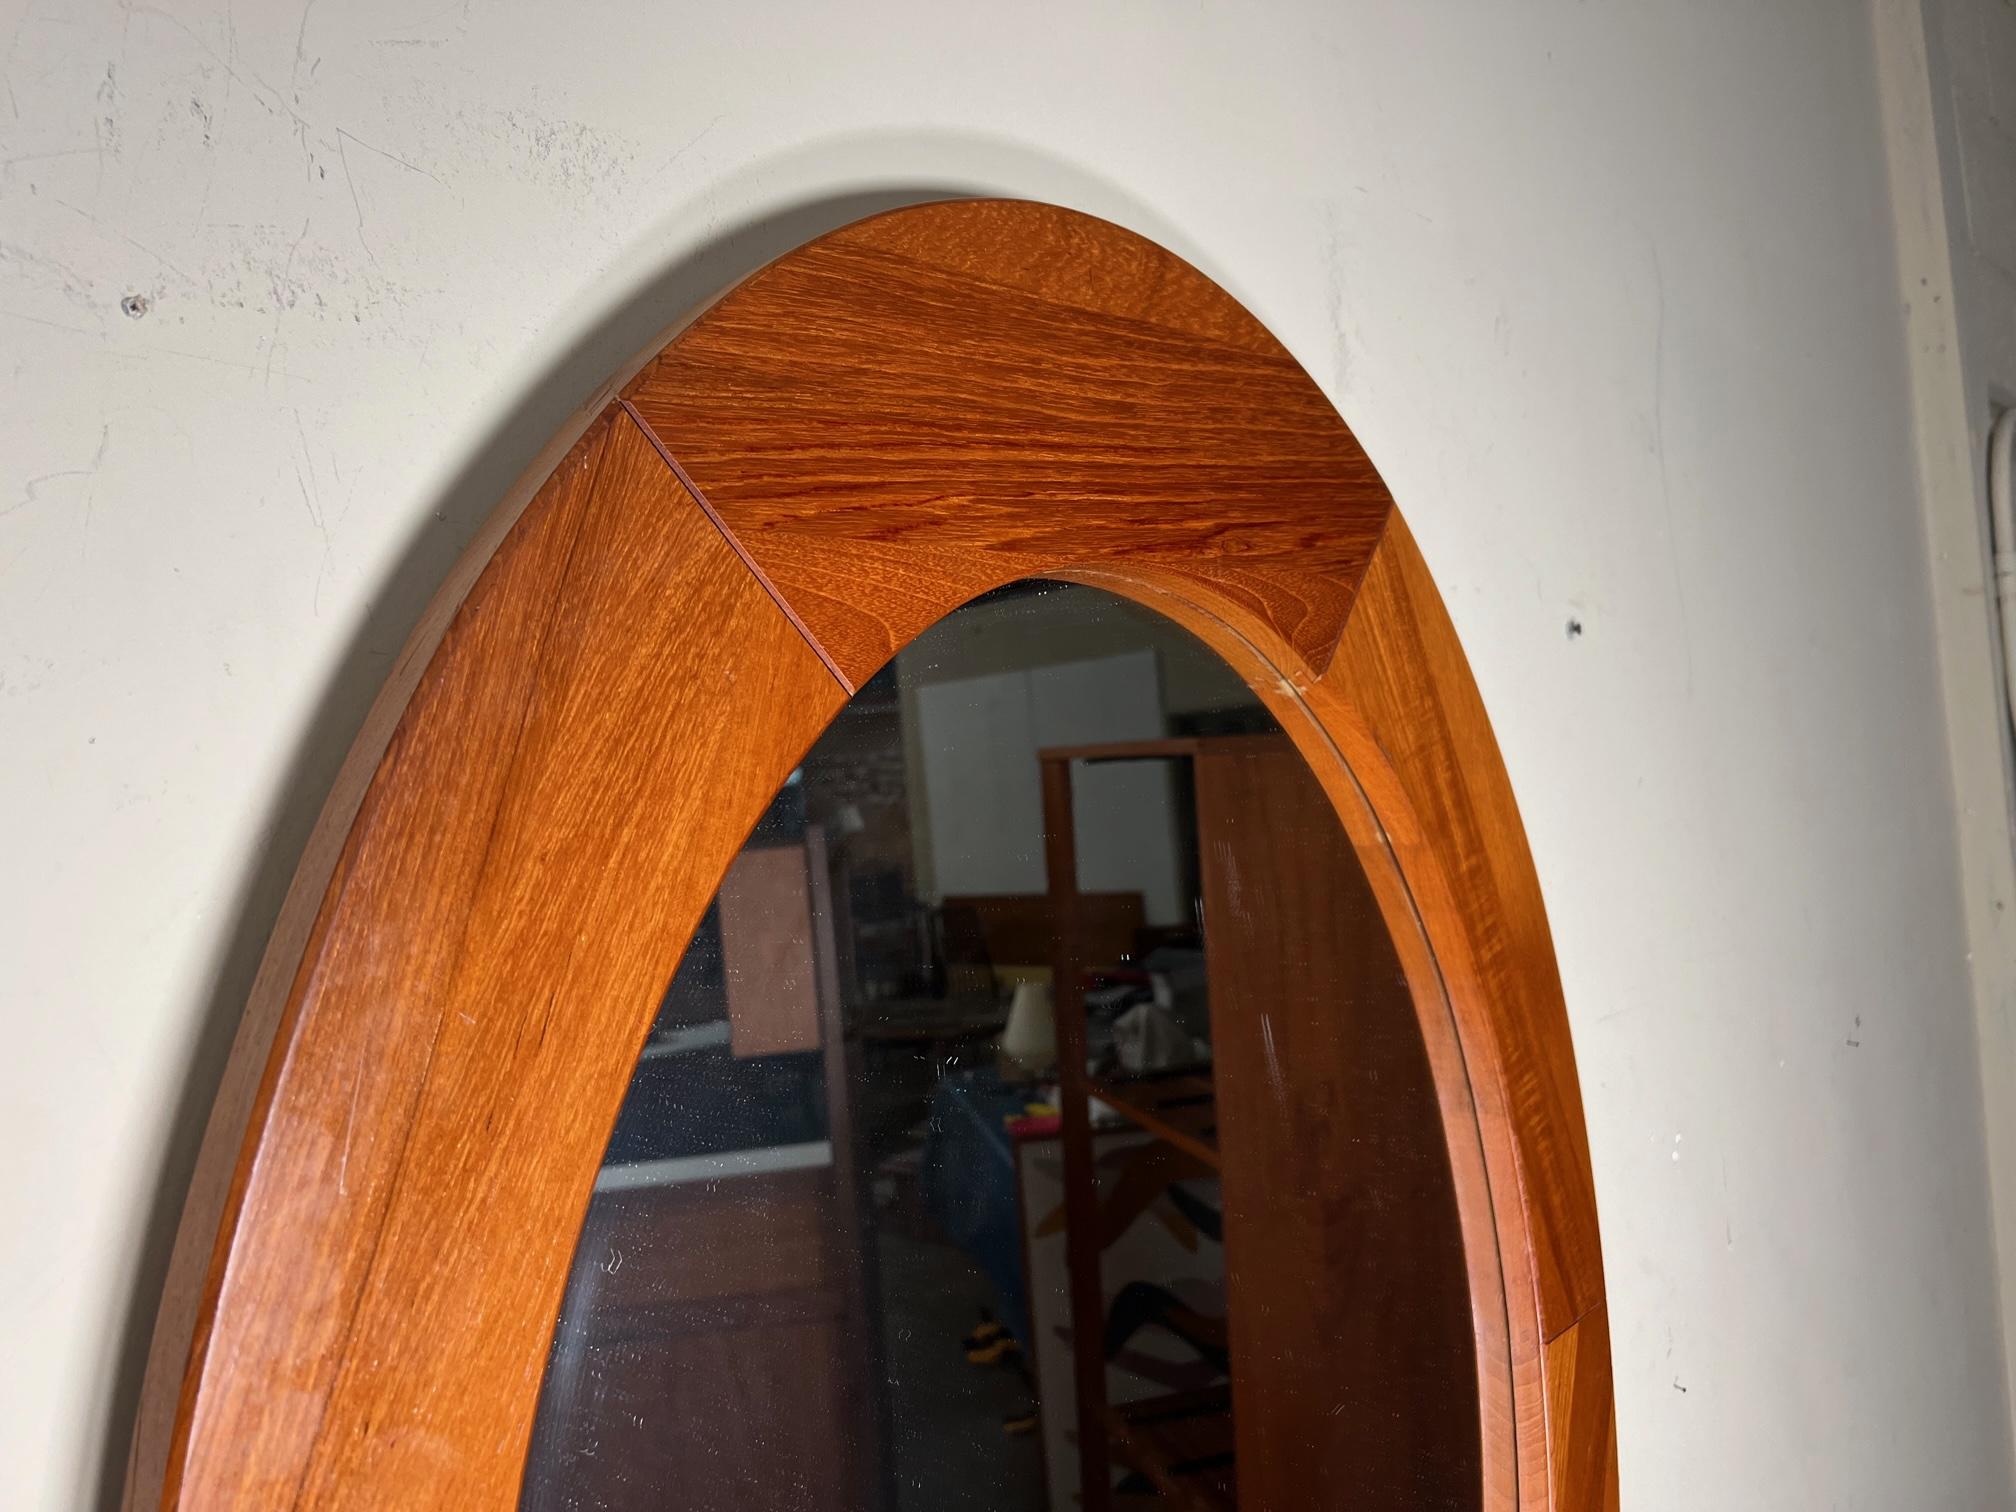 Amazing Danish teak oval mirror. Designed by Pedersen & Hansen and made by Viby J. Original paper label at the back.
Beautifully crafted teak frame surrounds a 32